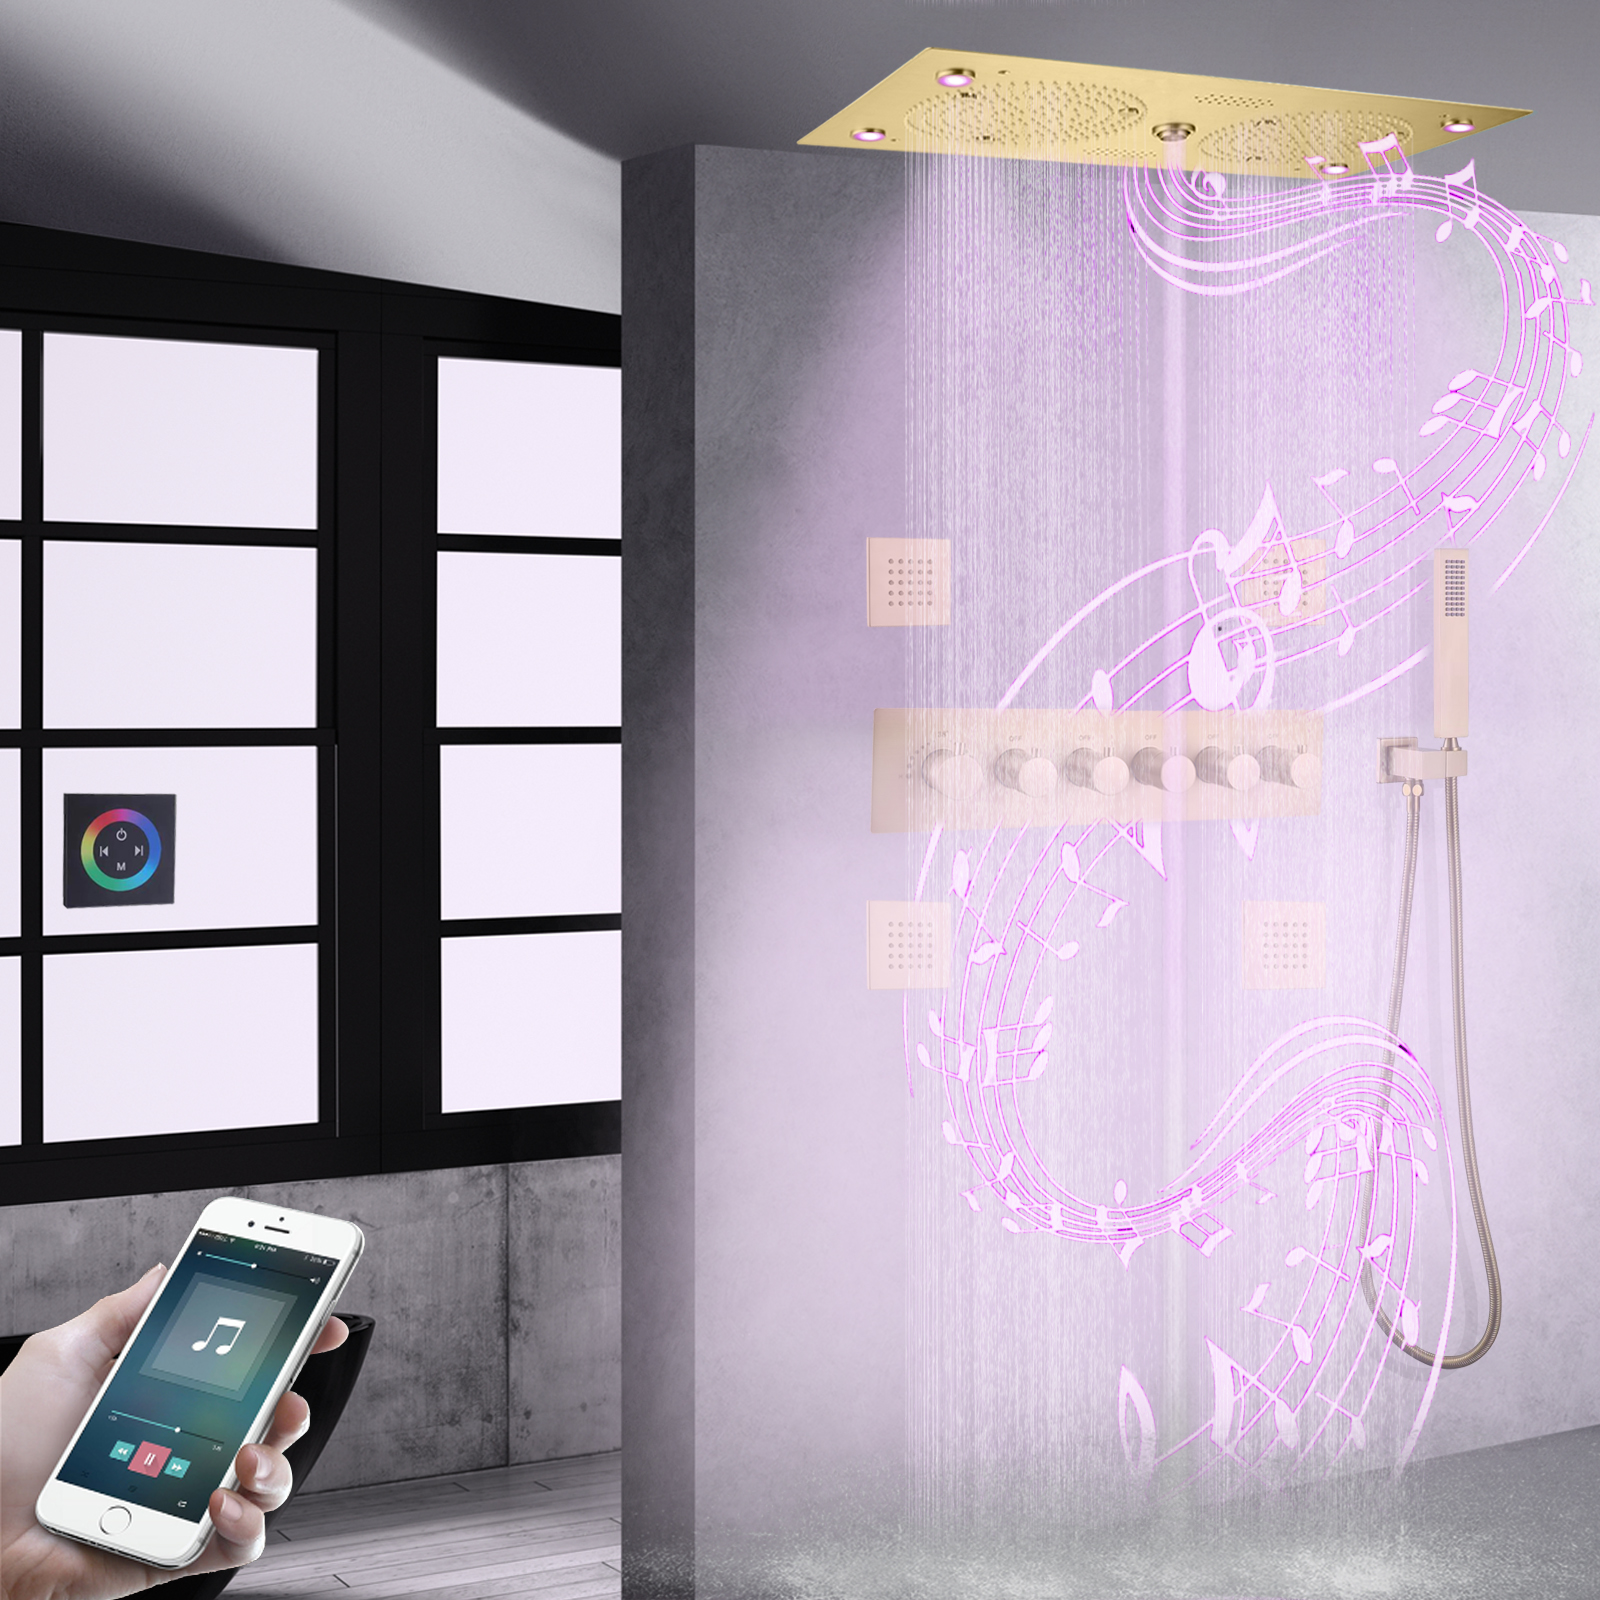 Brushed Gold LED Music Shower Faucet Built-in Shower Thermostatic Rainfall Douche Spa Shower Set